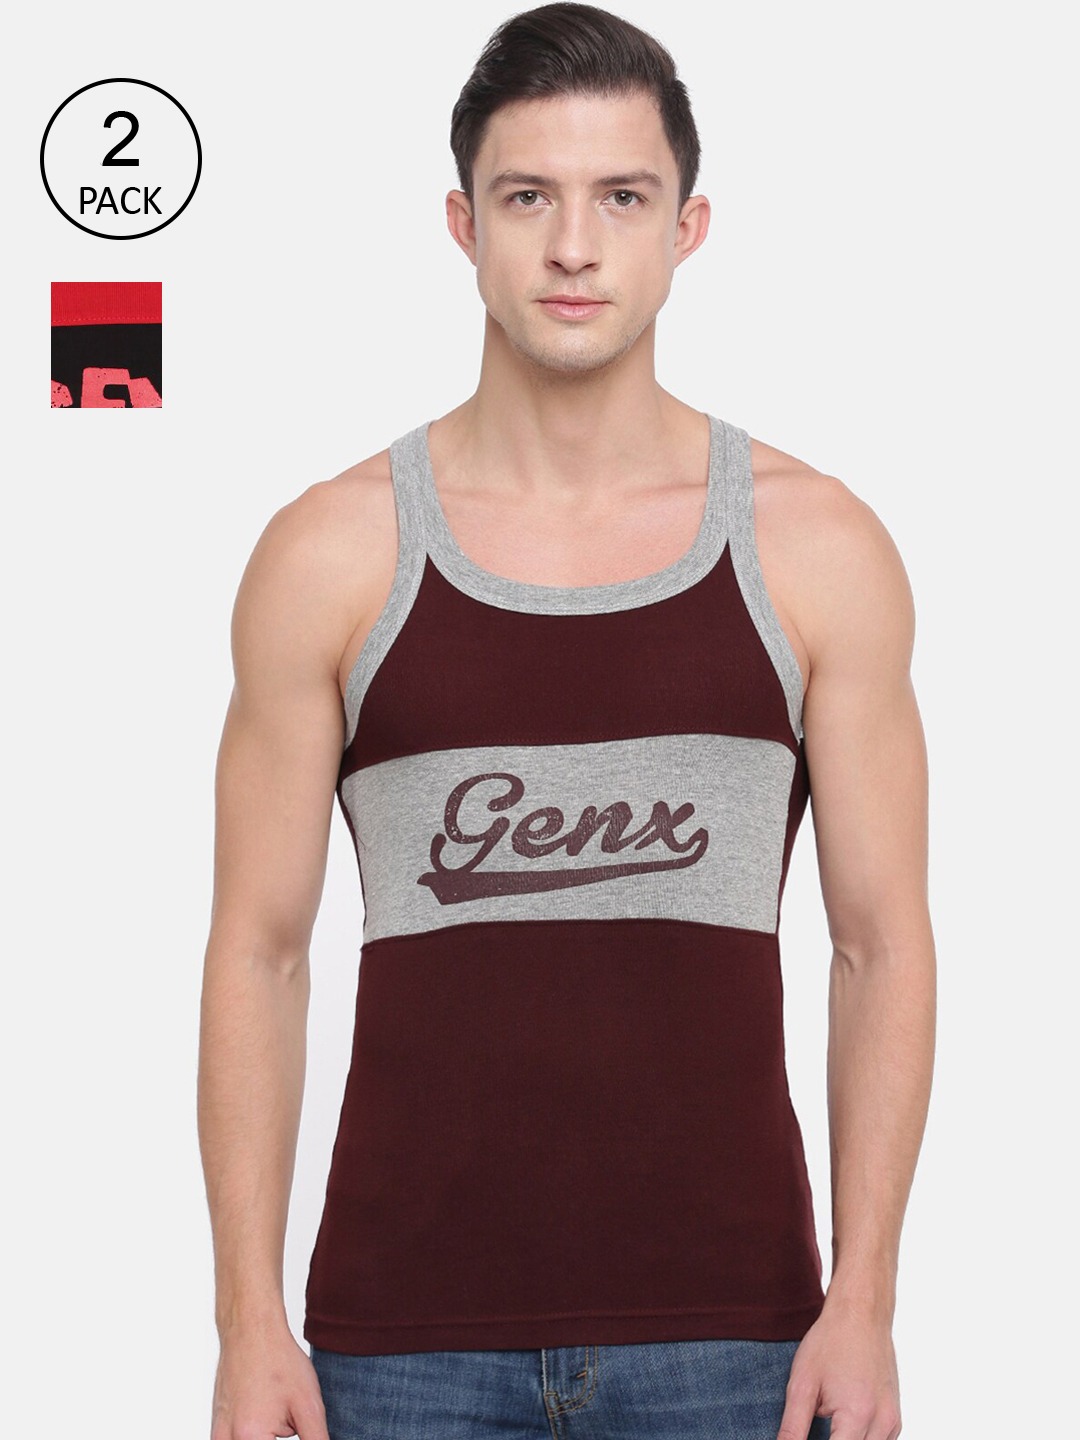 Clothing Innerwear Vests | Genx Men Assorted Pack of 2 Colourblocked Cotton Gym Vests  GENX_GV_7711_AST_2PC - LW76753